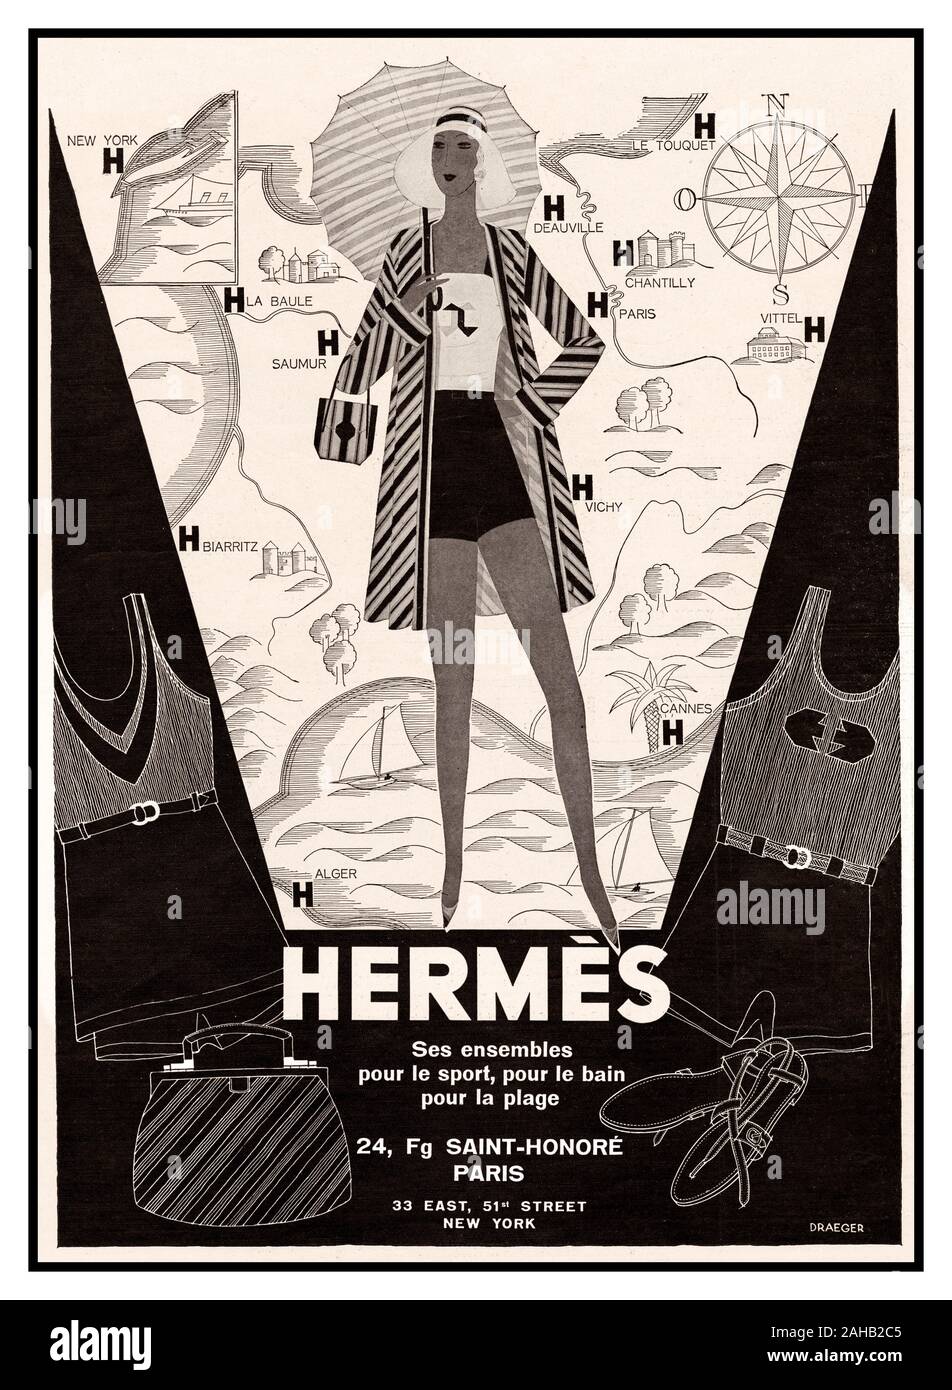 HERMÈS Vintage 1930’s page Illustration french advertisement for Hermès luxury sportswear clothing superimposed on a map of suitable vacation spots - all locations with Hermès shops (indicated by a bold letter 'H'). France L'Illustration Magazine Publication, June 7, 1930 Paris & New York Stock Photo